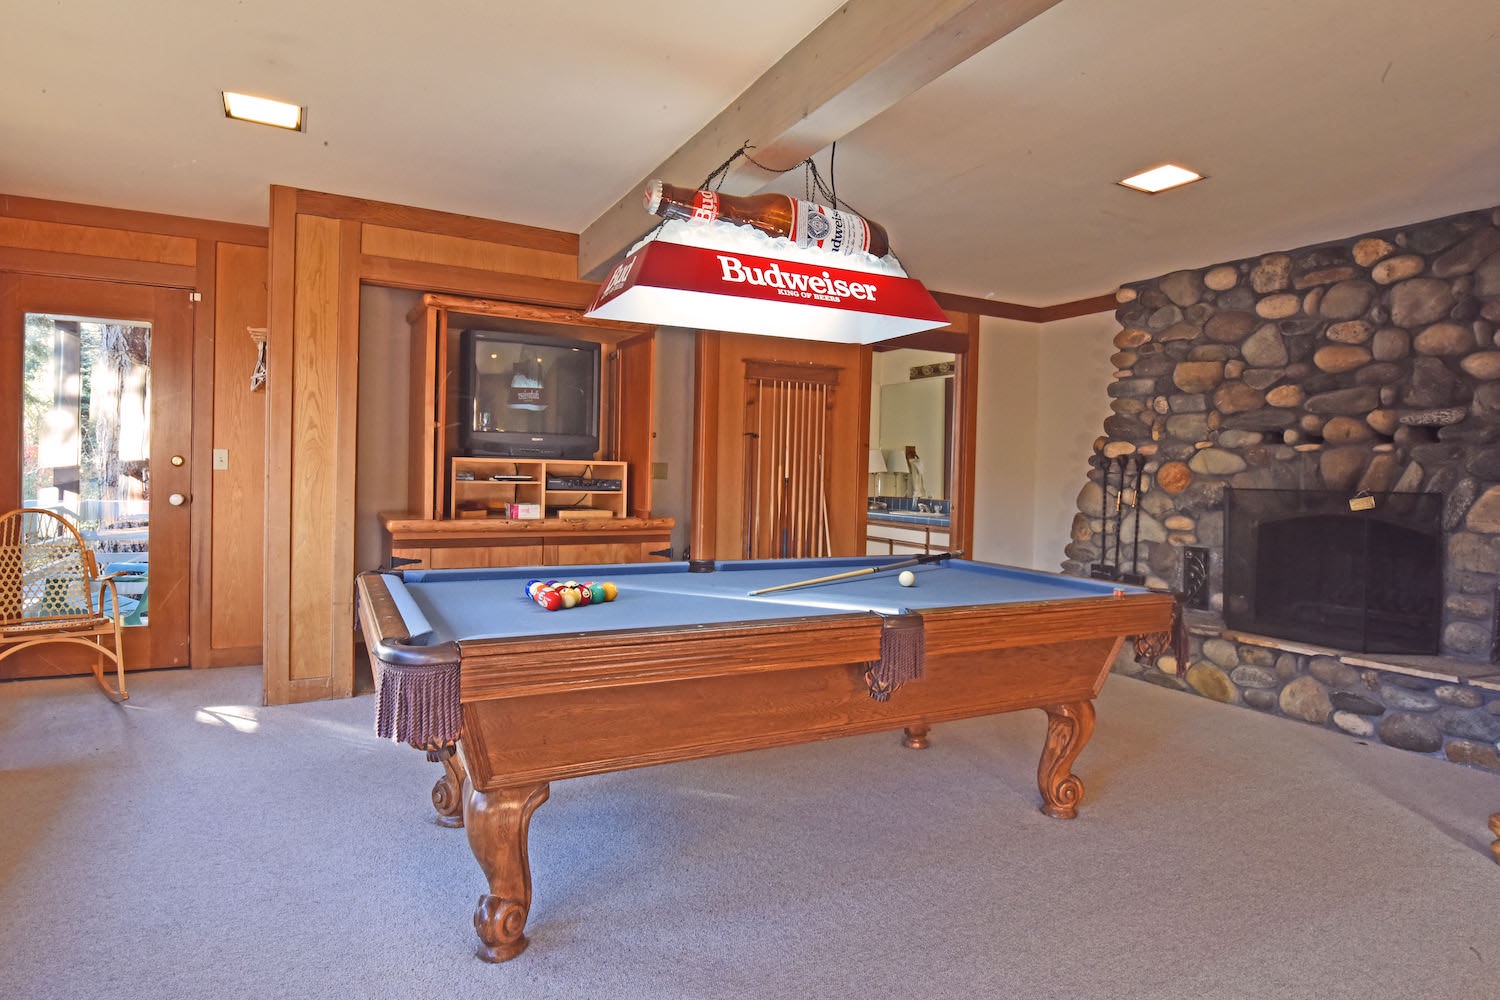 Downstairs game room pool table and fireplace